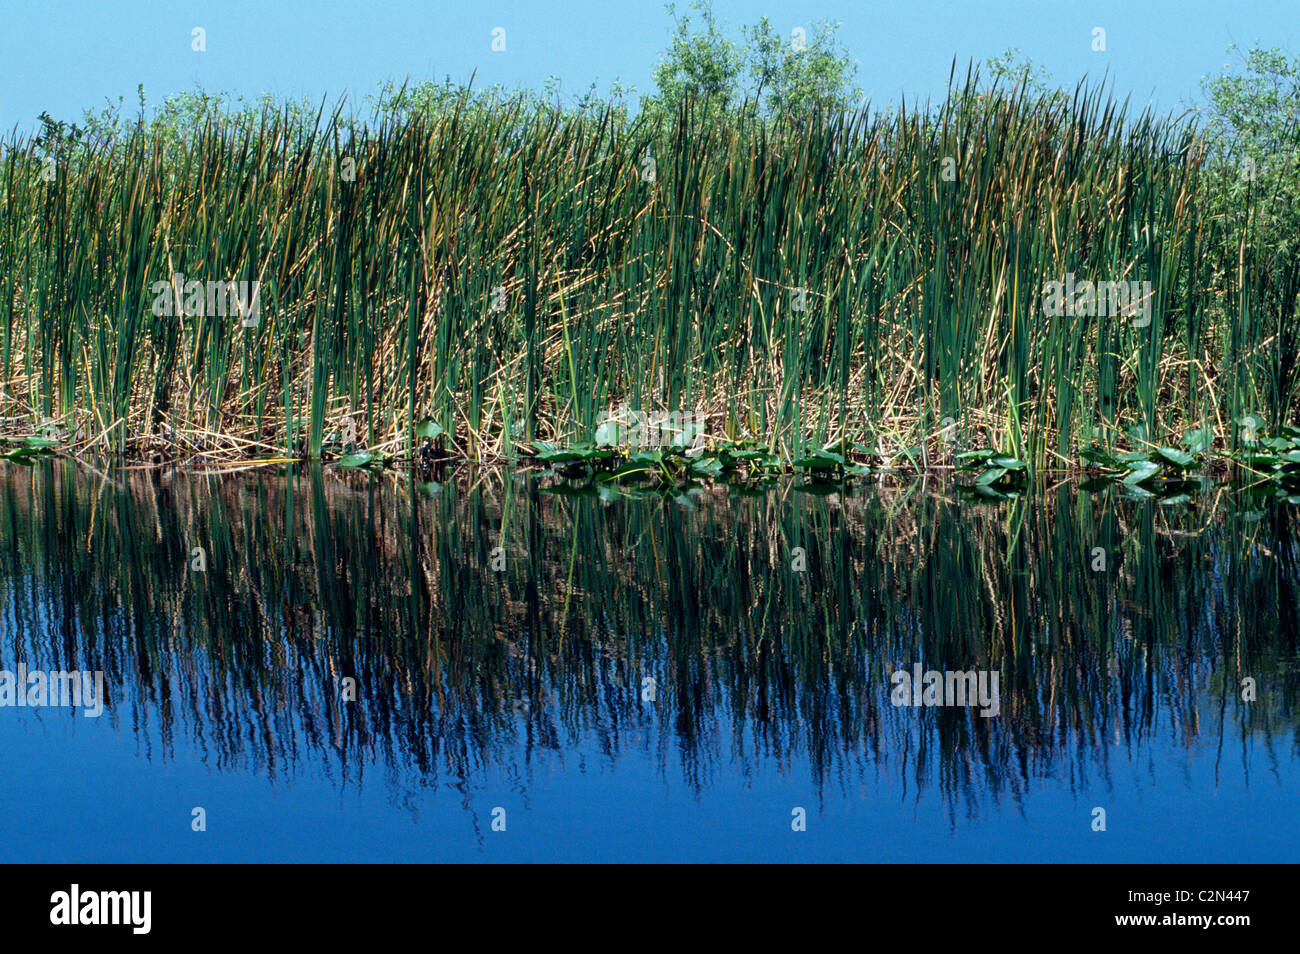 In south Florida, USA, native sawgrass reflects in waters of a vast wetlands wilderness, The Everglades, which is aptly nicknamed the 'River of Grass. Stock Photo